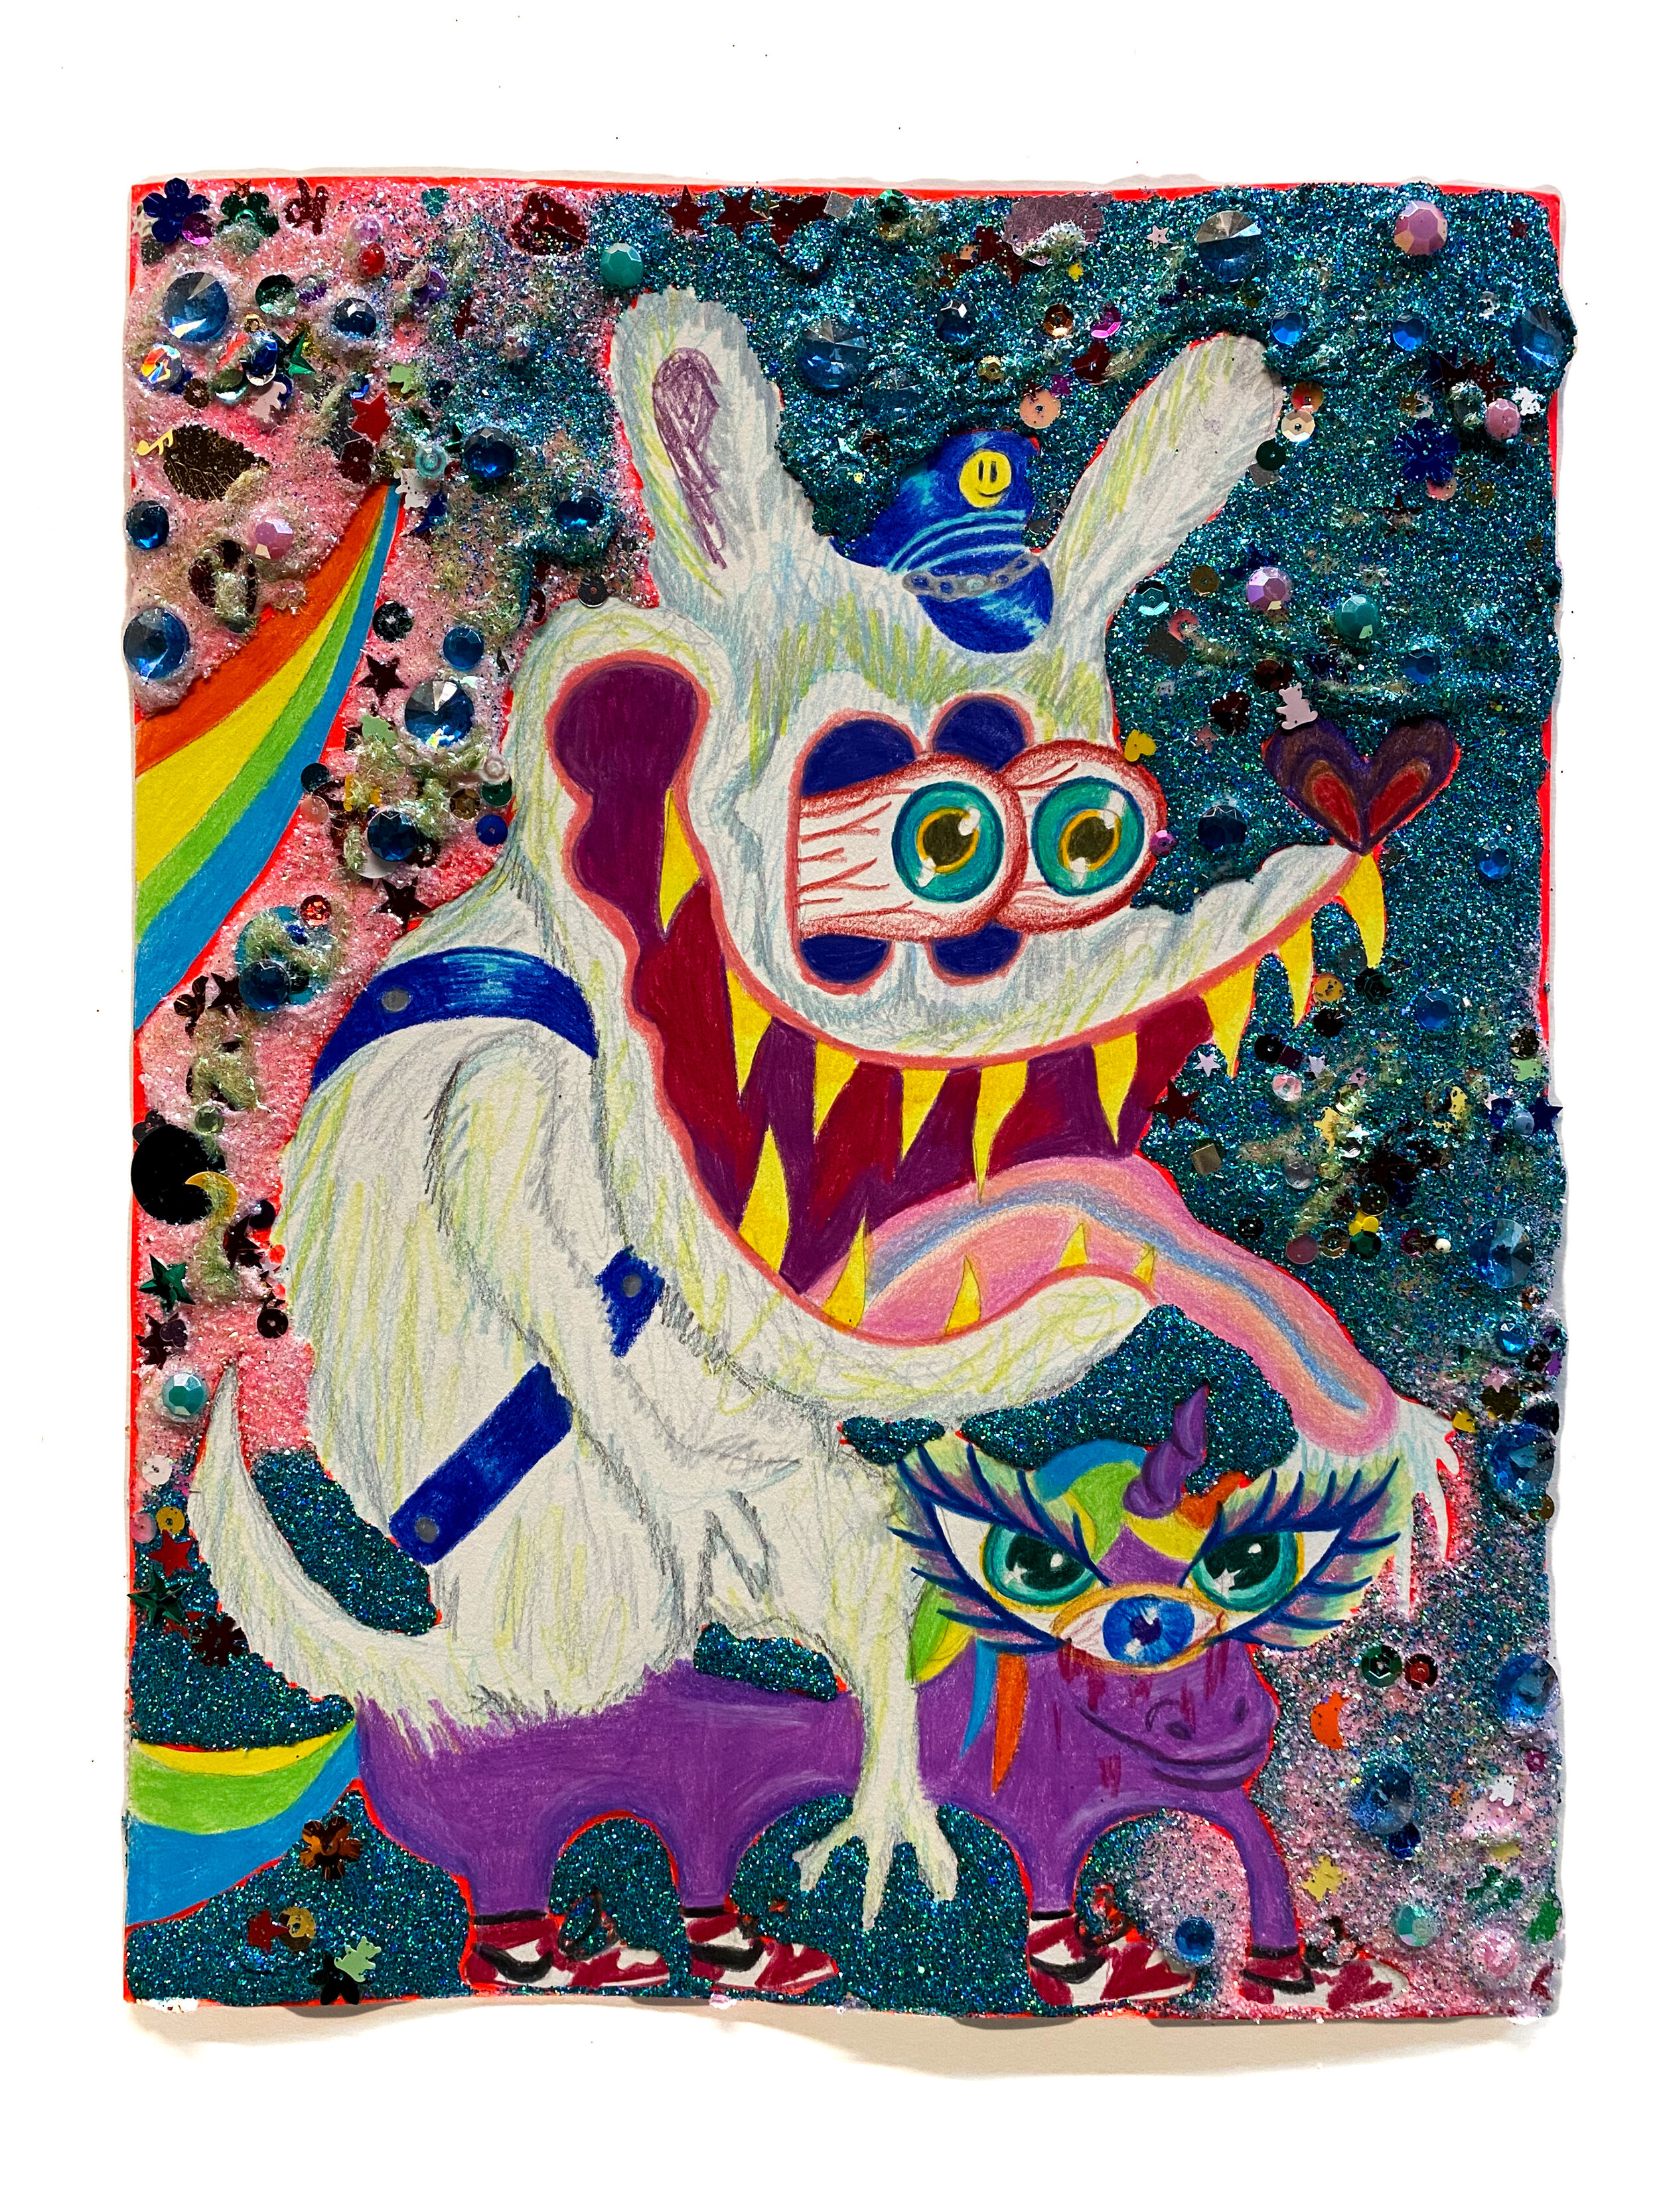   Ashamed Girls Pony #7 (OG Bobby Dolphin Riding a Purple Unicorn),  2021  14 x 11 inches (35.56 x 27.94 cm.)  Colored pencil, sequins, plastic gems, acrylic paint, Elmer's glue, Modge Podge, and glitter on paper 